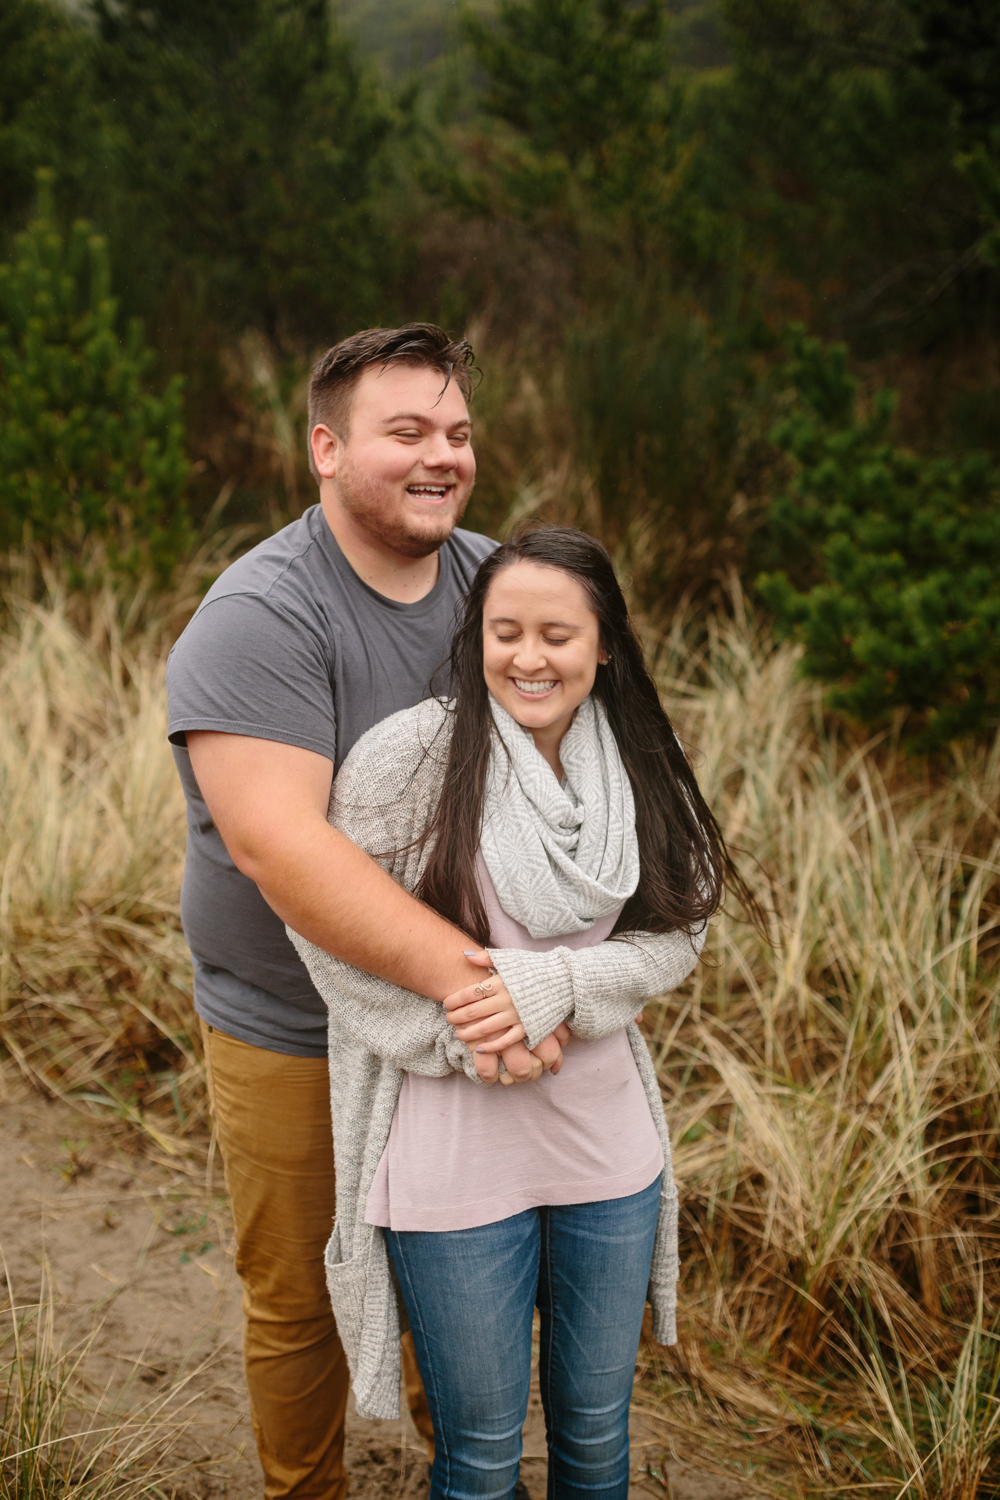 A young couple laughing during their photo shoot